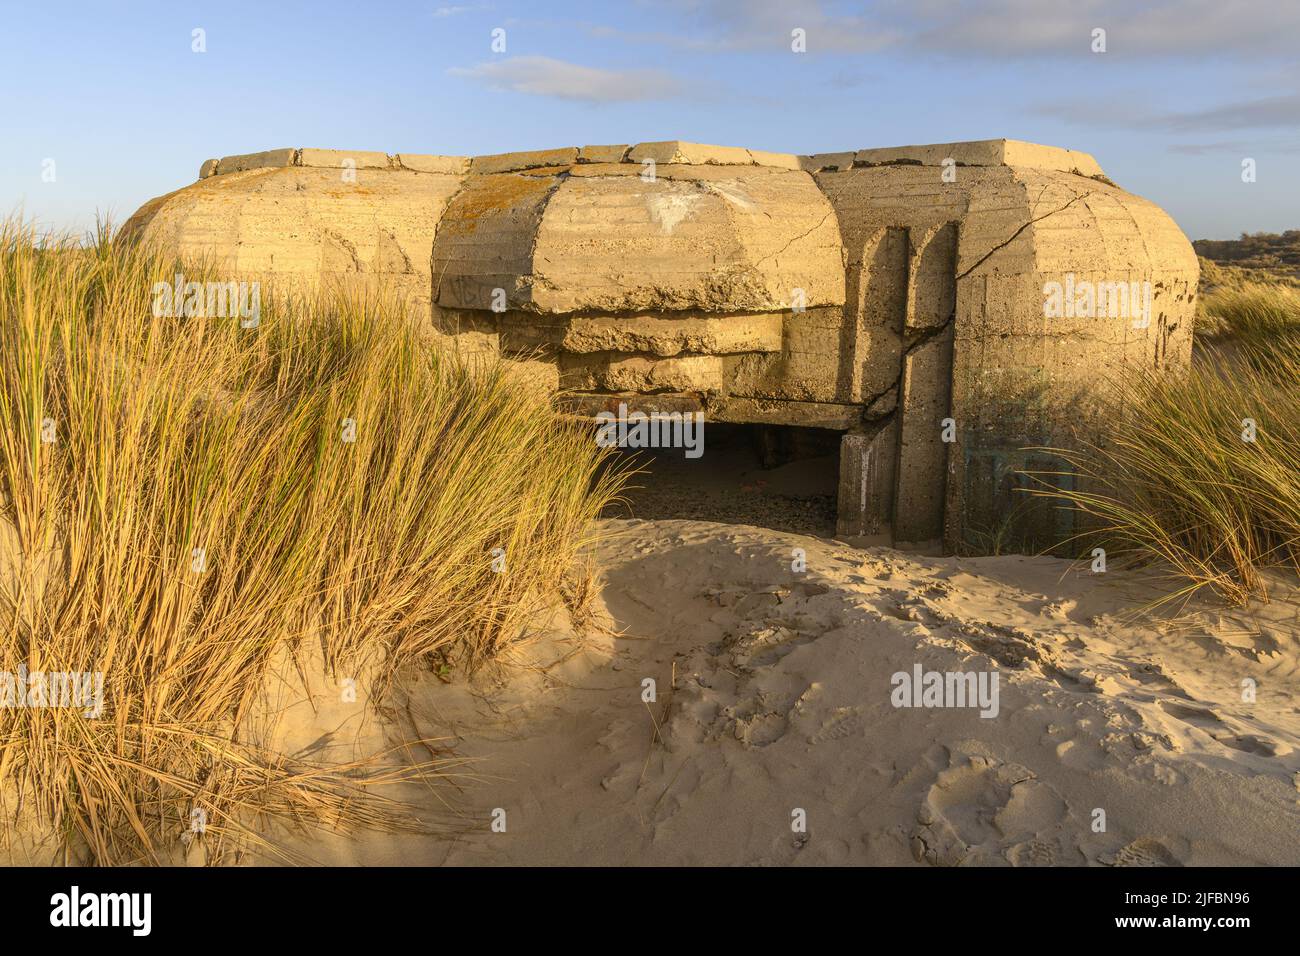 France, Somme, Baie de Somme, Saint-Valery-sur-Somme, The dunes of Marquenterre between Fort-Mahon and the Baie d'Authie at sunset, blockhouse, vestige of the Atlantic Wall Stock Photo